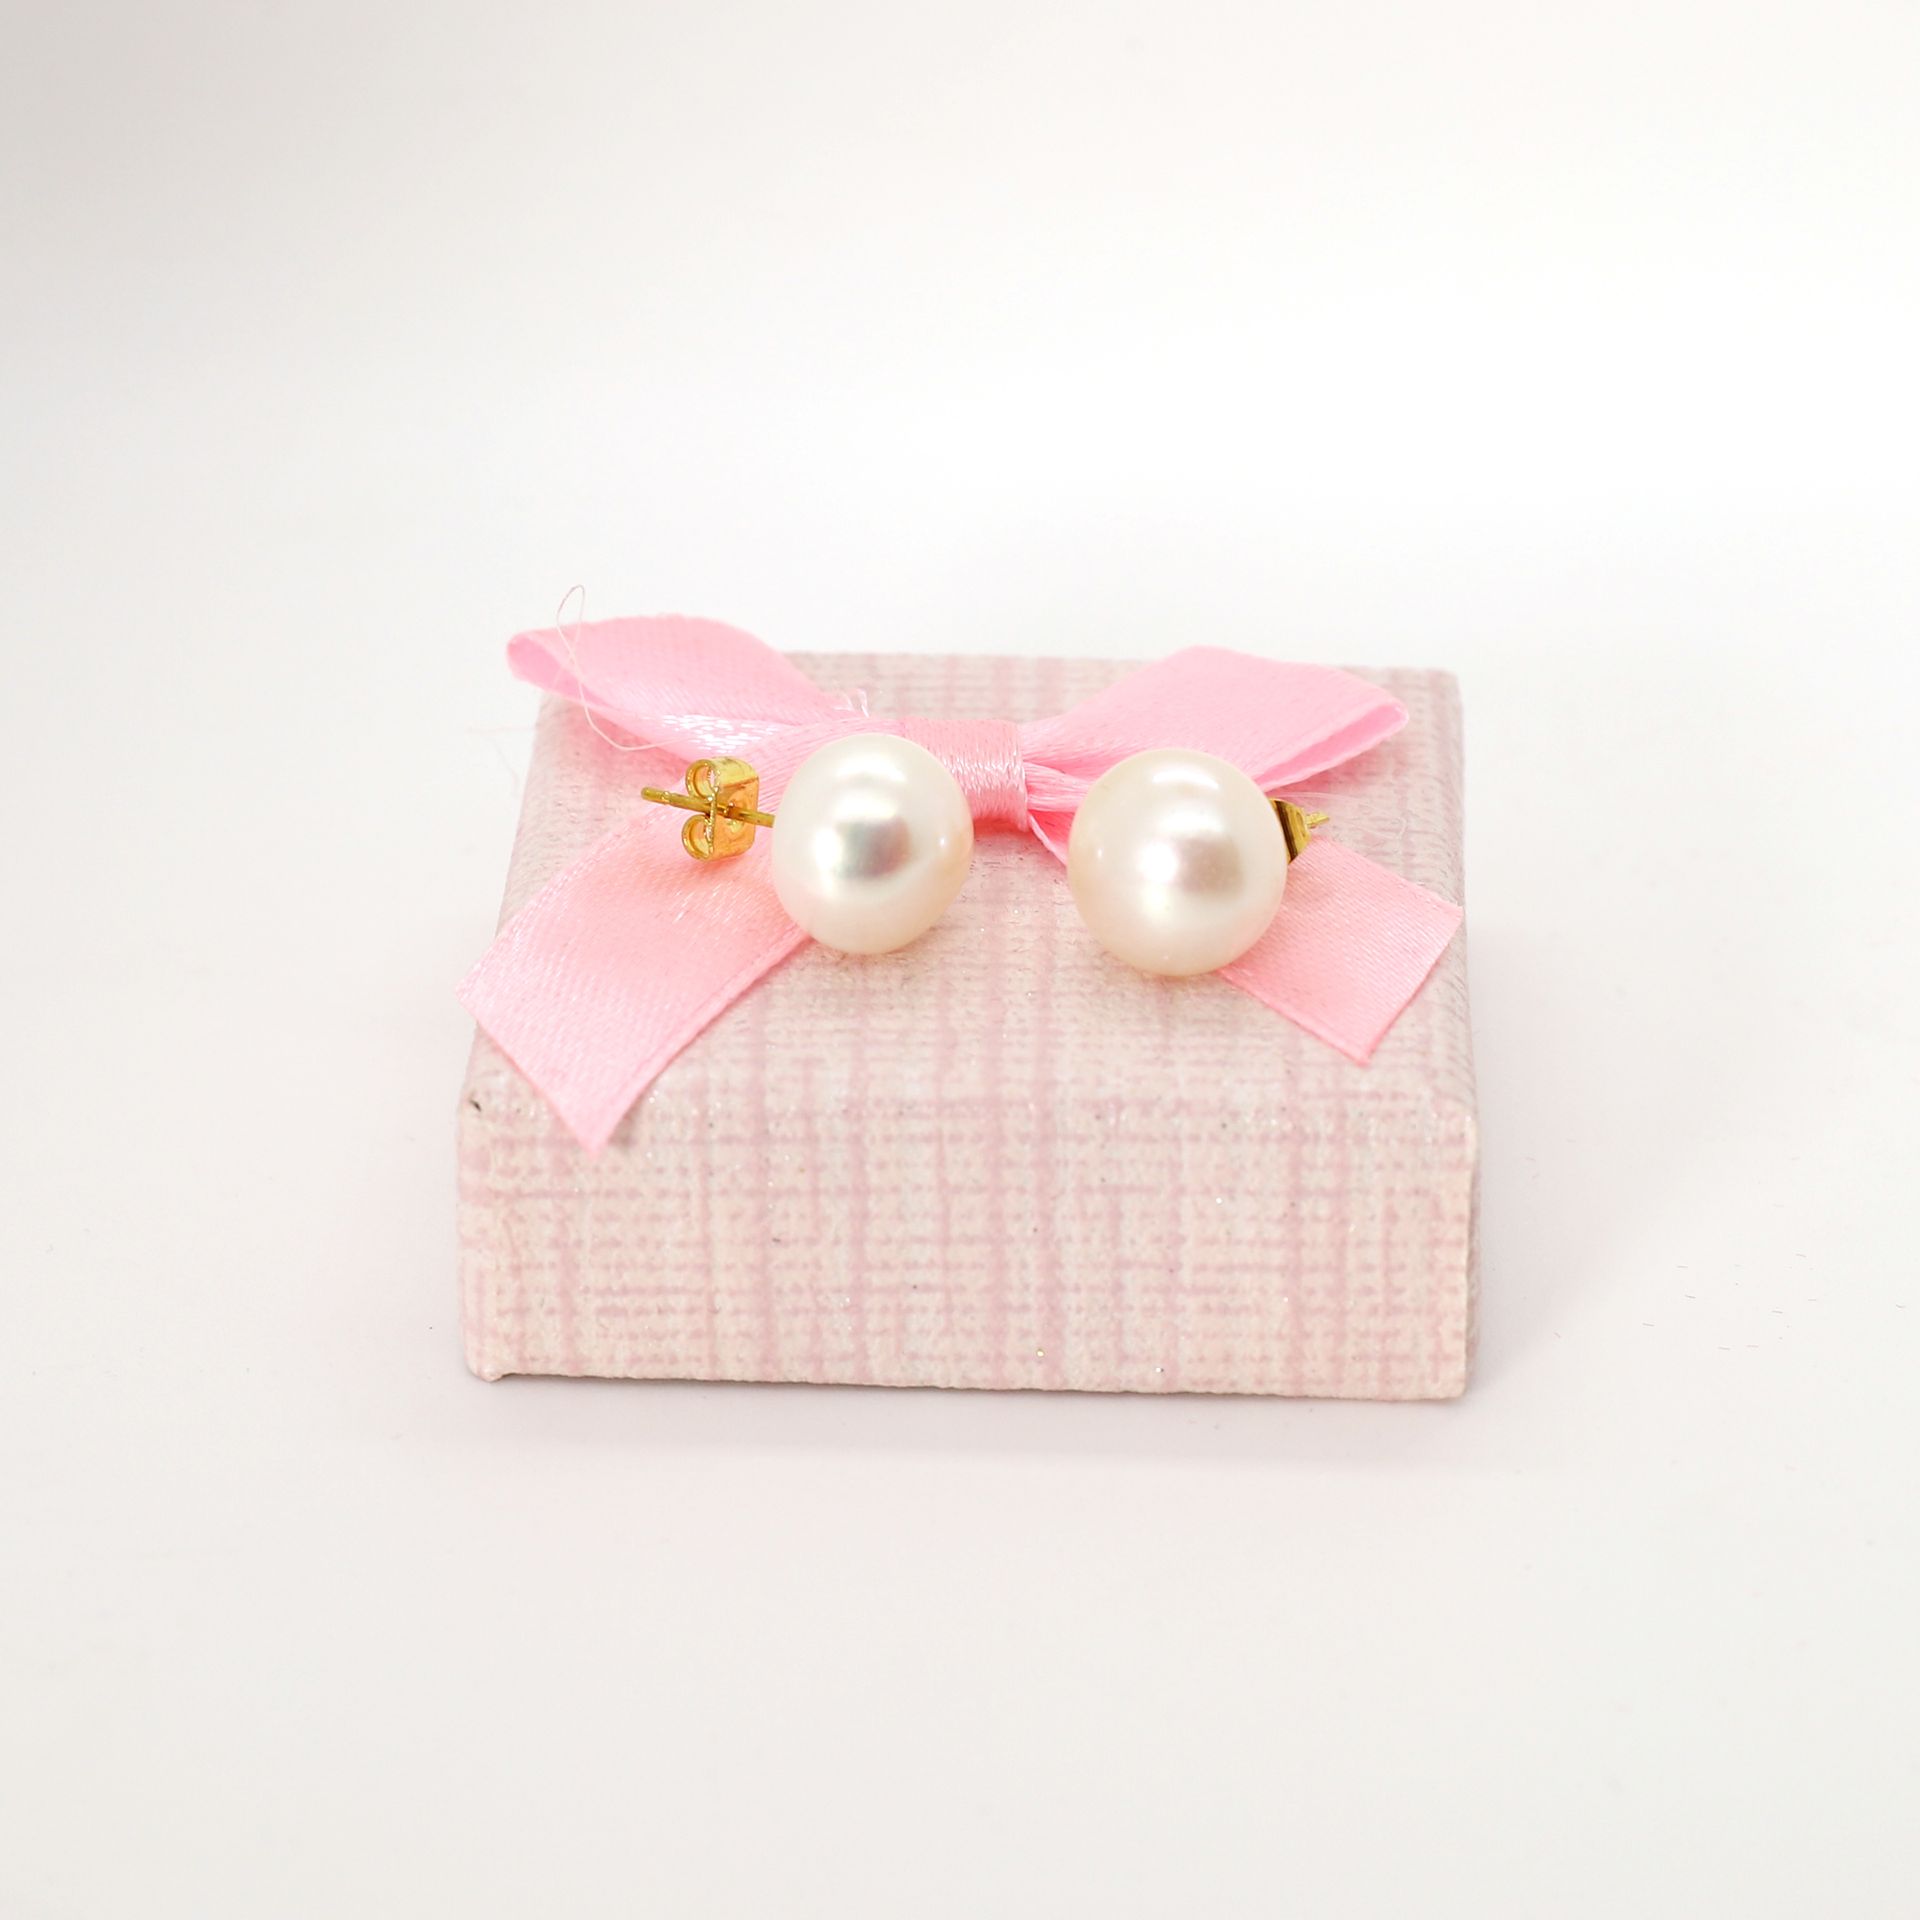 Null PAIR OF WHITE CULTURED PEARL EARRINGS

Diameter : 10 mm approx.